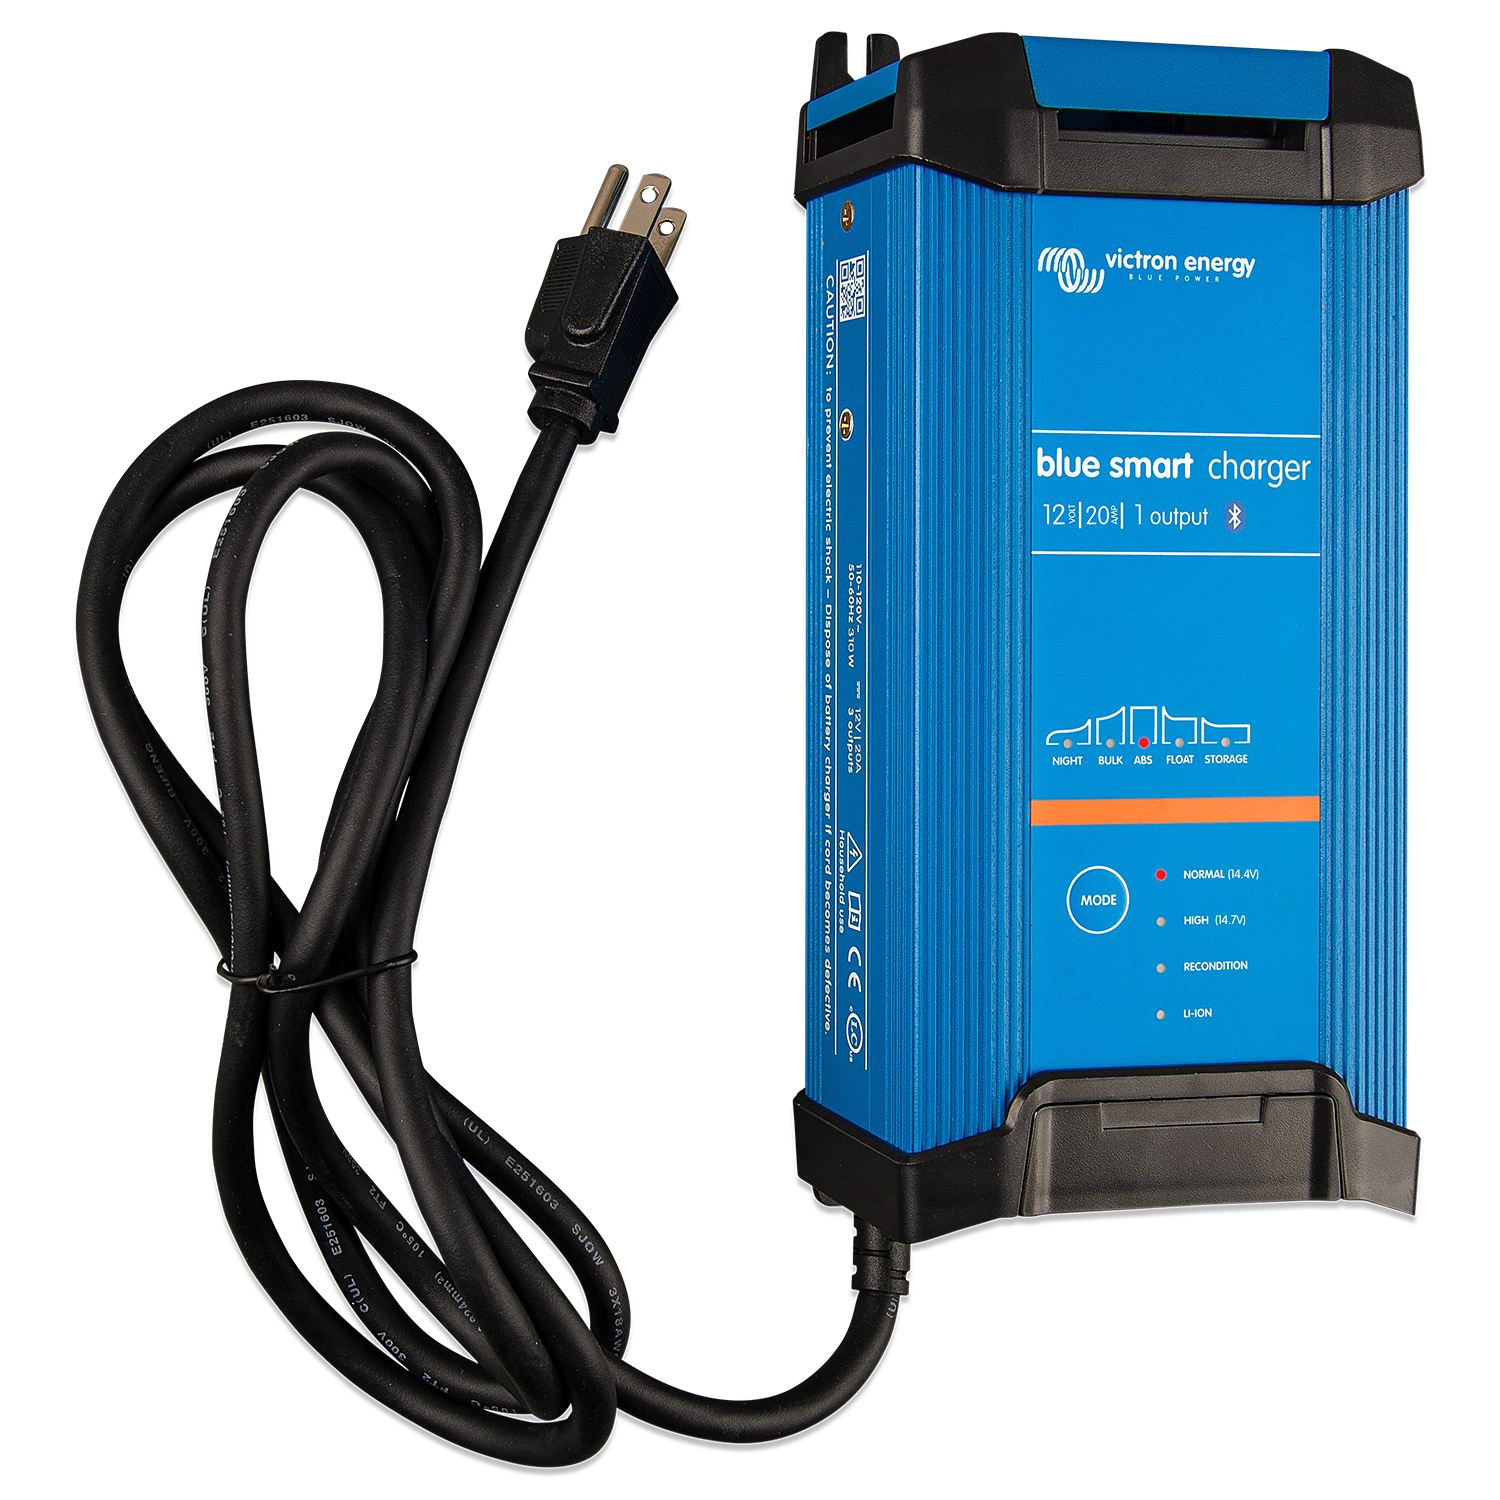 https://www.canbat.com/downloads/20A-12V-Charger-Blue-Smart-for-Lithium-Battery.png